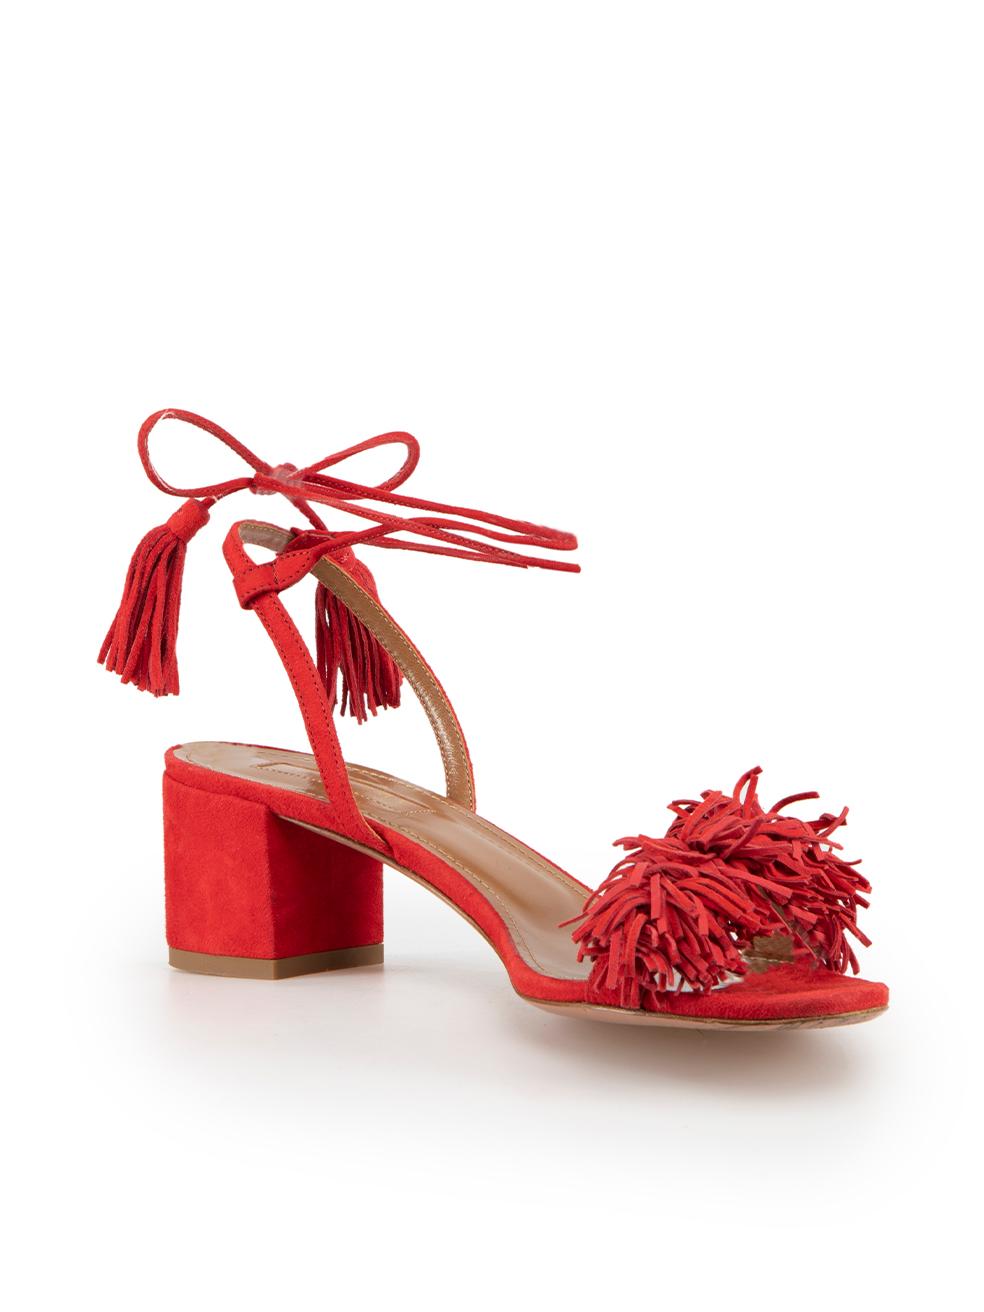 CONDITION is Very good. Minimal wear to shoes is evident. Minimal wear to the left shoe heel with very light abrasion to the suede on this used Aquazzura designer resale item.
 
 Details
 Red
 Suede
 Strappy sandals
 Fringed accent
 Tie strap